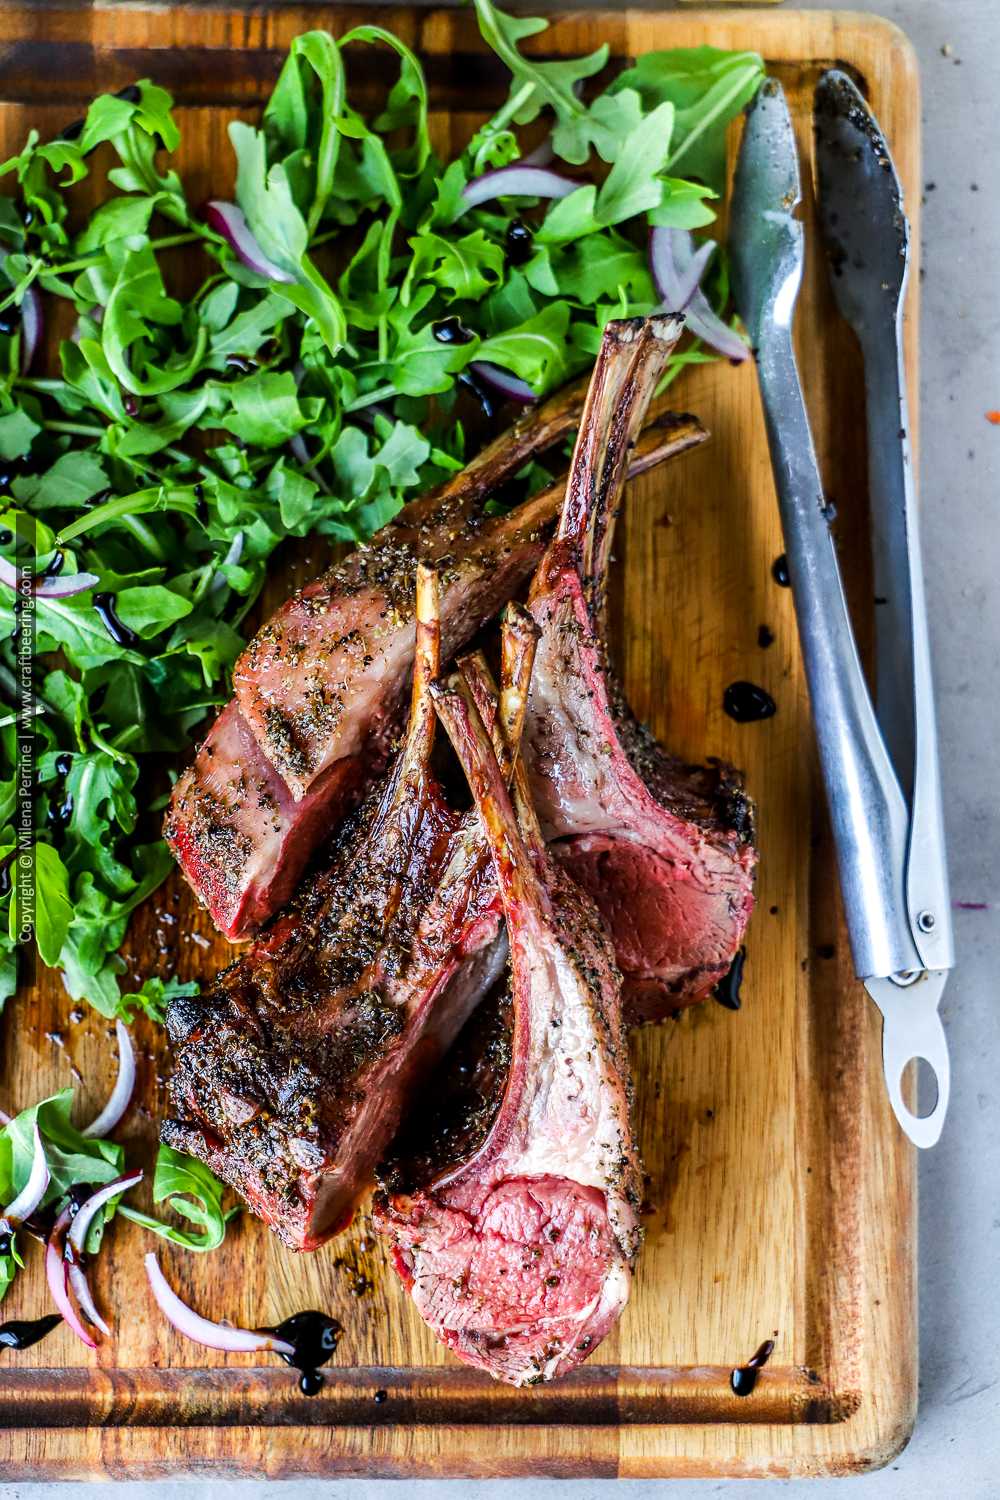 Smoked lamb rib chops just carved from a full rack.